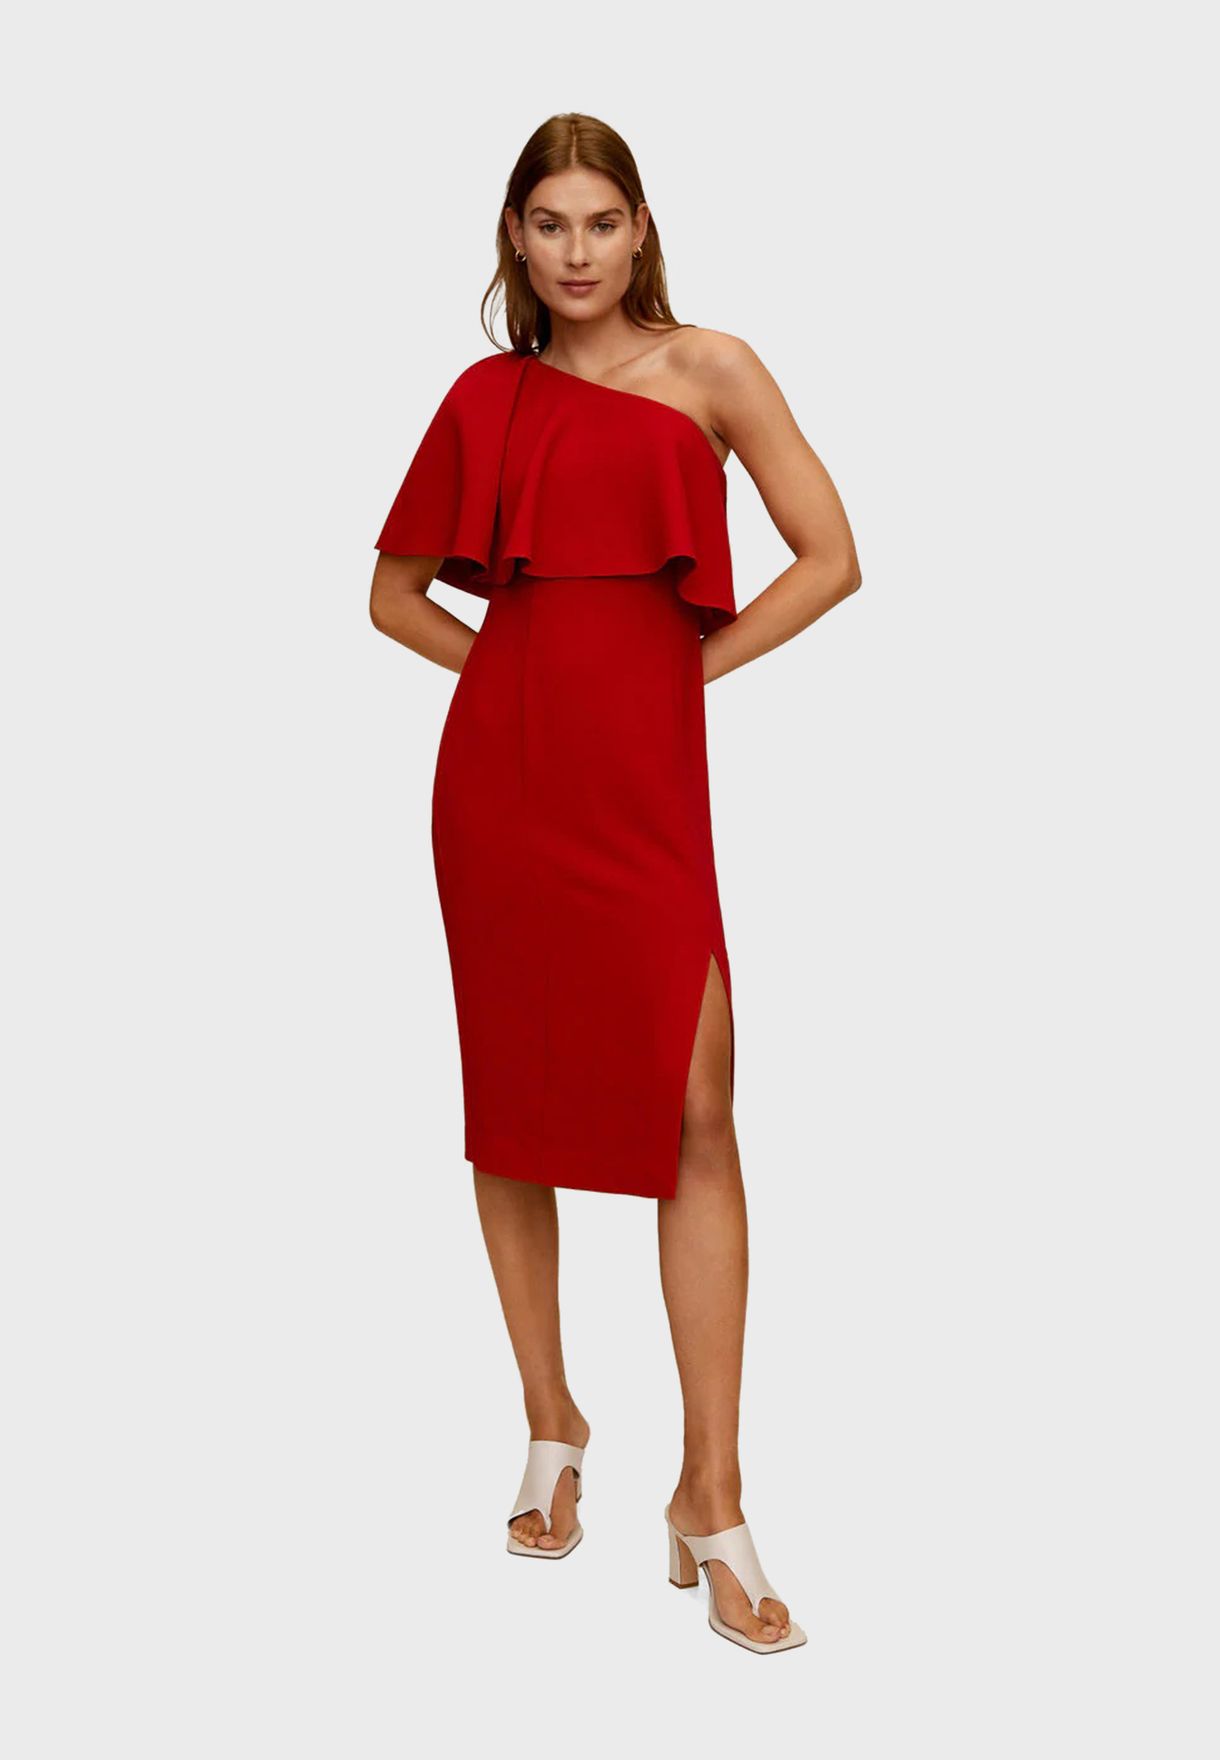 red one strap dress